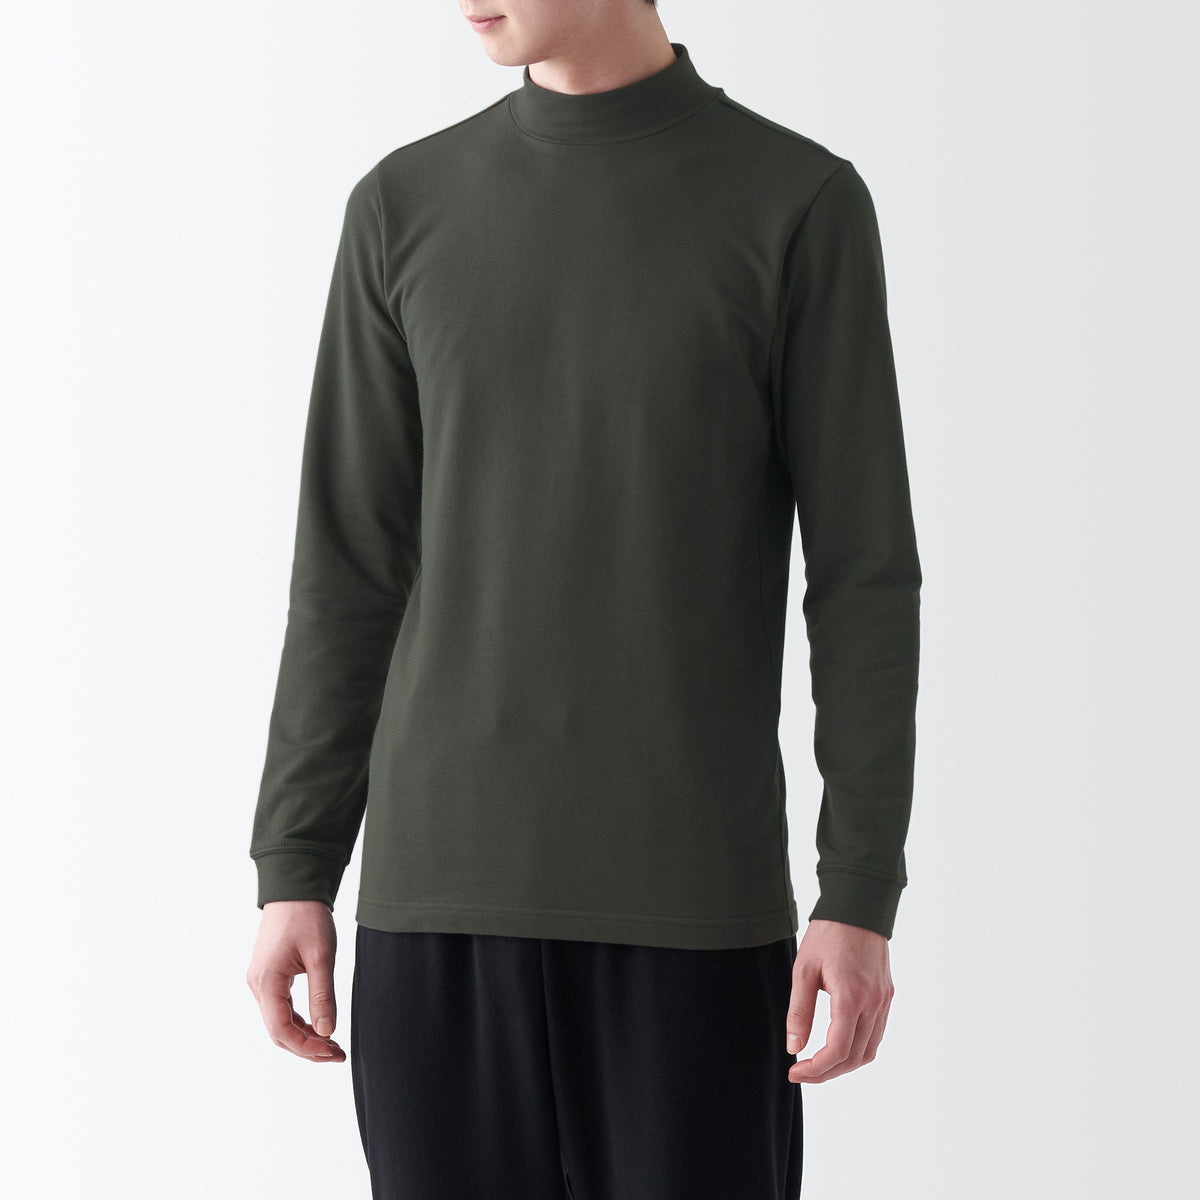 Buy HYPERNATION Grey Color Cotton High Neck Long Sleeves T-Shirt for  Men(HYPM02403_S) at